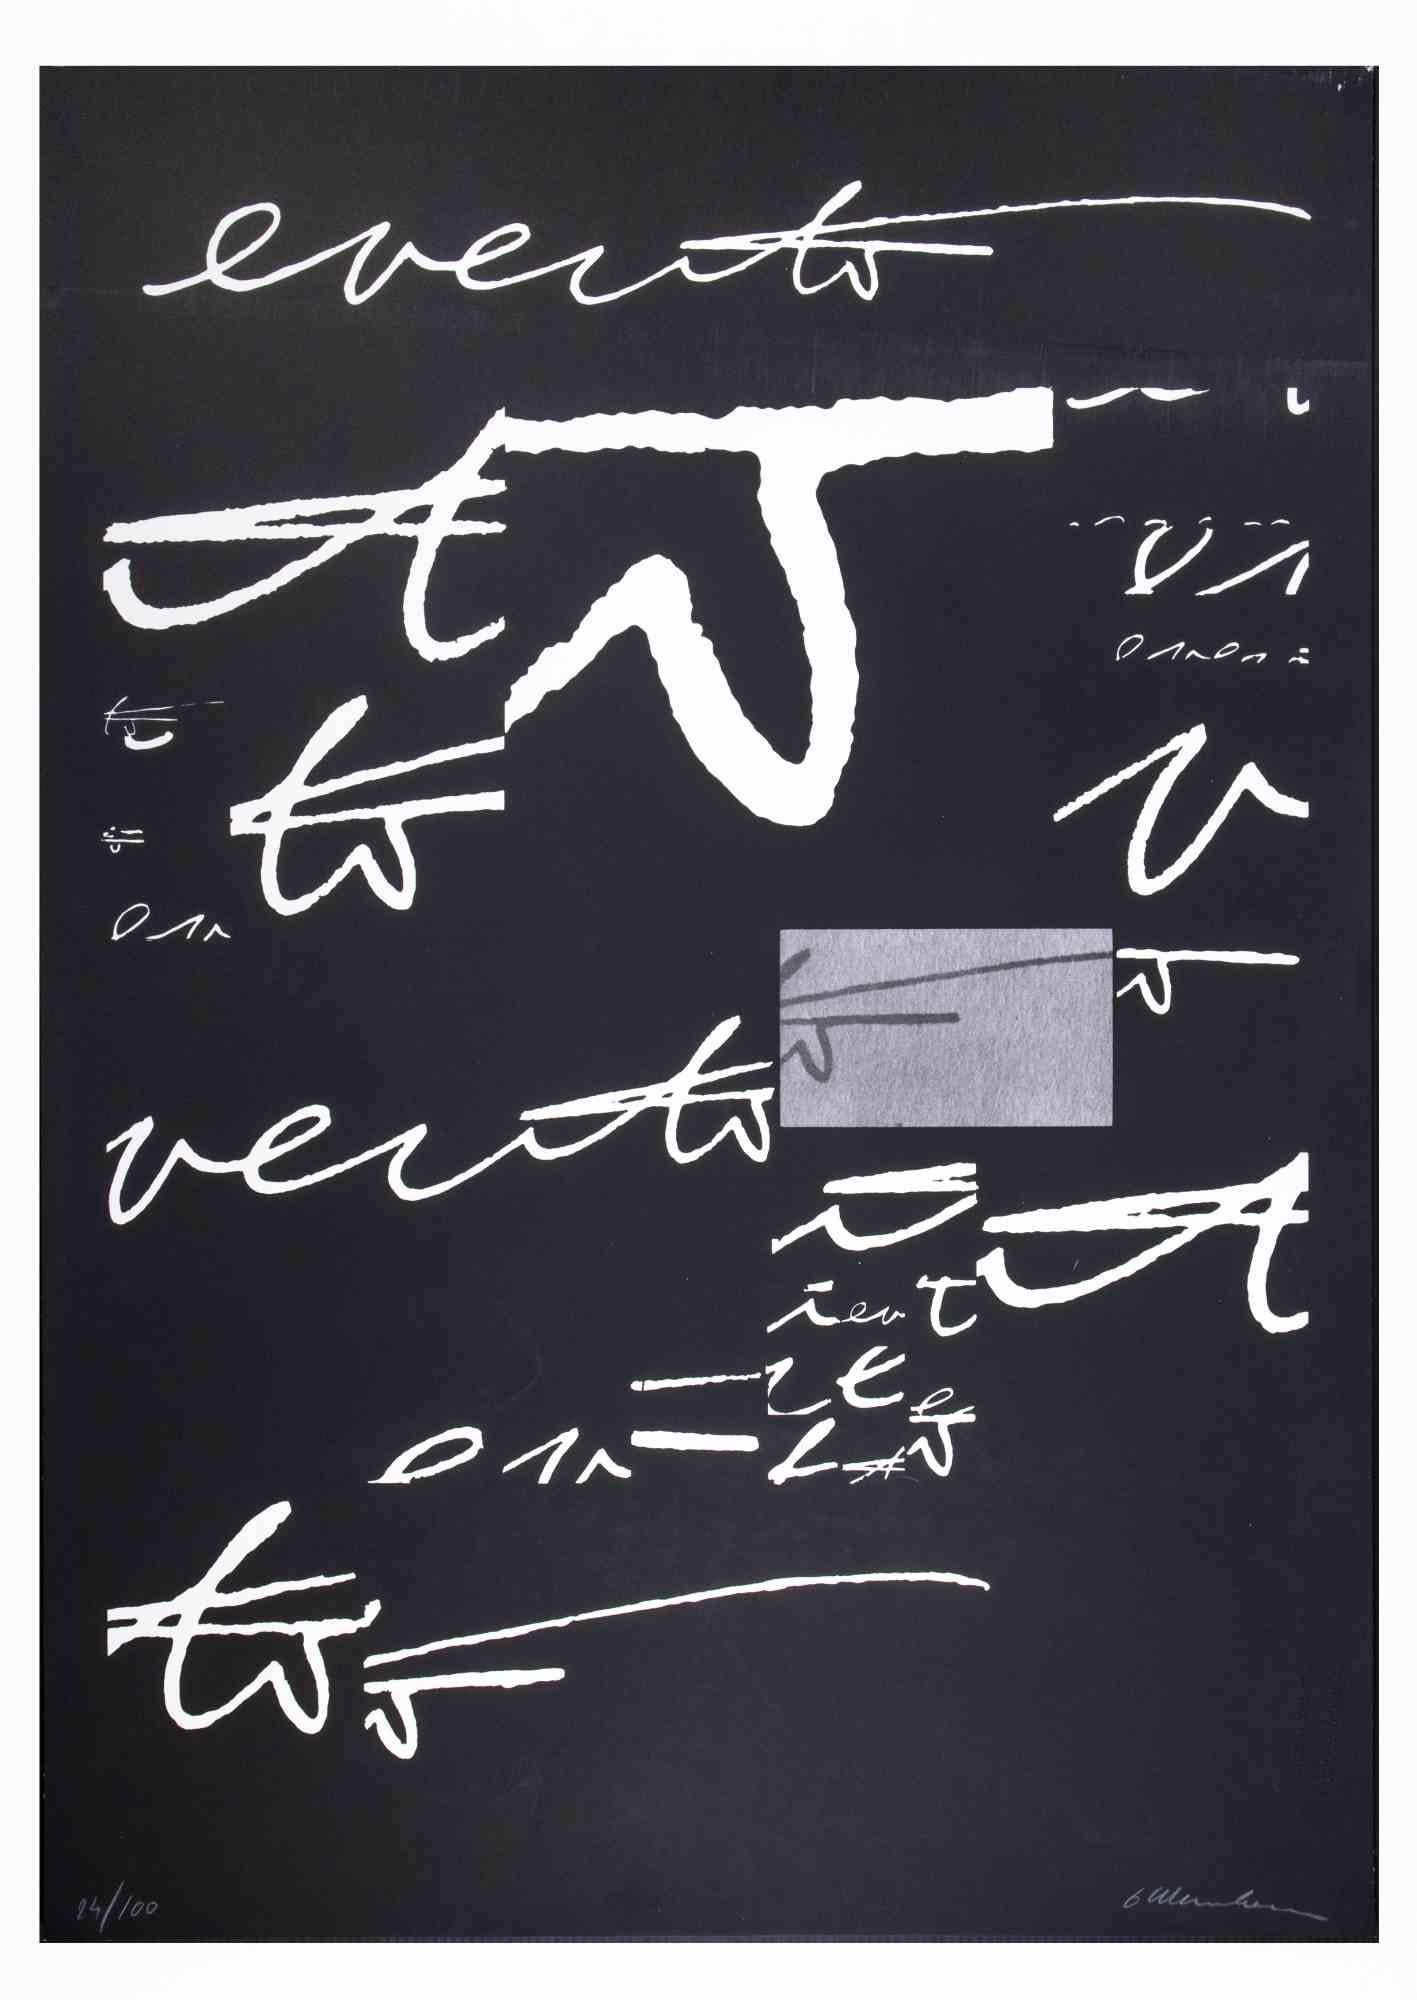 Abstract Composition is an Original screen print realized by Plinio Mesciulam in 1973.

Very good condition on a black cardboard.

Hand-signed and numbered by the artist on the lower margin.

Limite edition n.14 of 100 copies, editor " La nuova